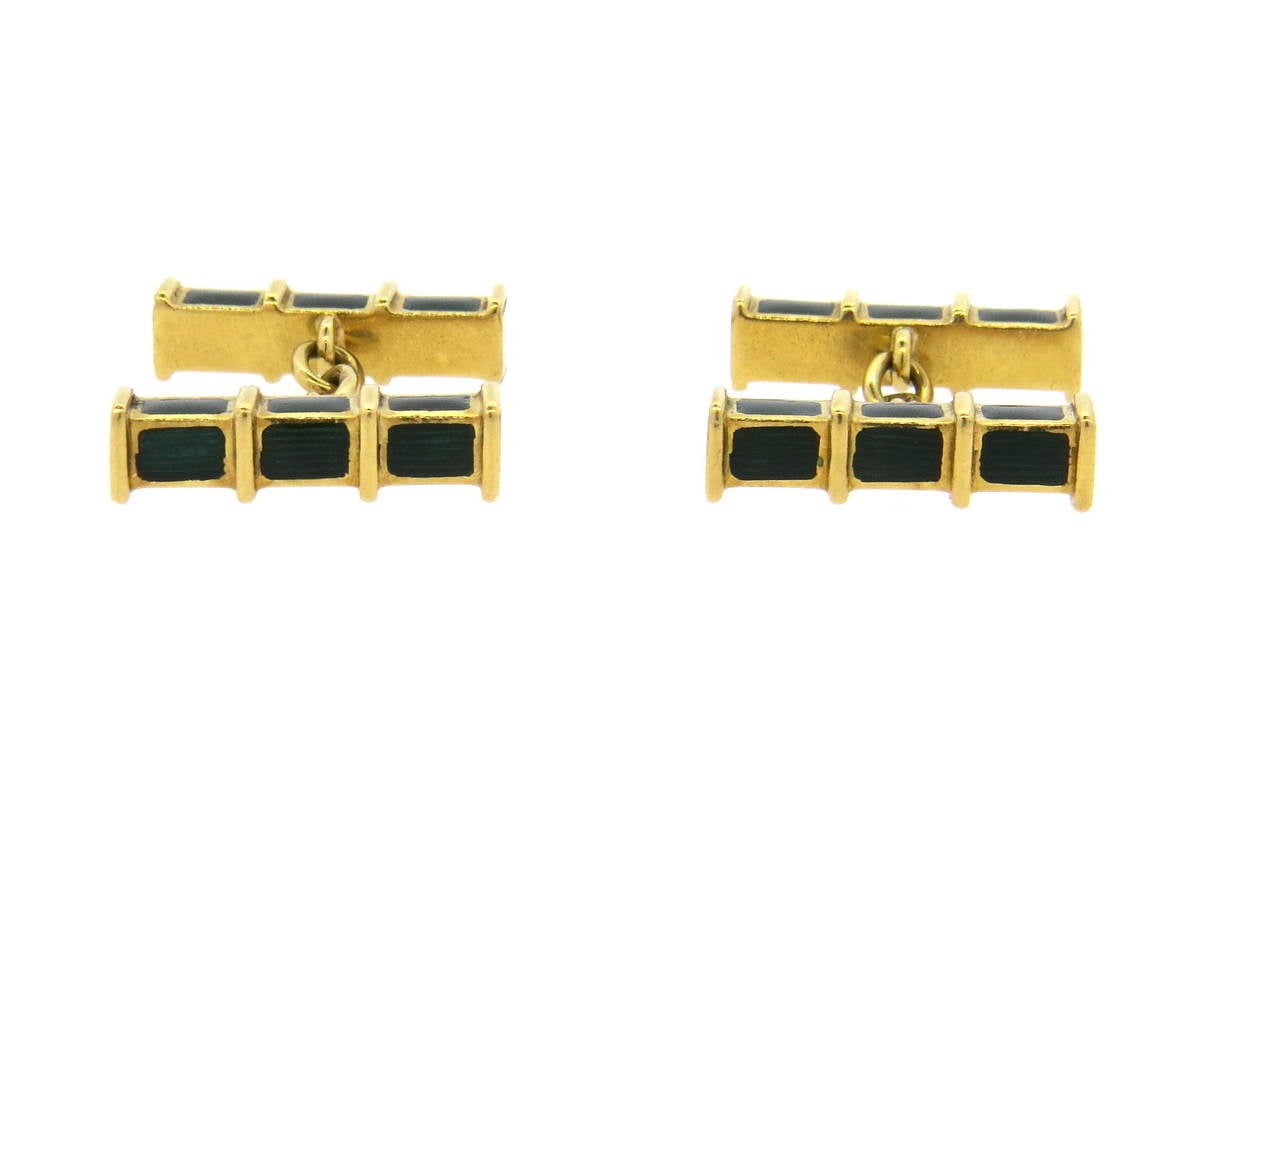 A pair of 18k yellow gold cufflinks coated with green enamel.  The cufflinks measure 20mm x 5mm and weigh 15.2 grams